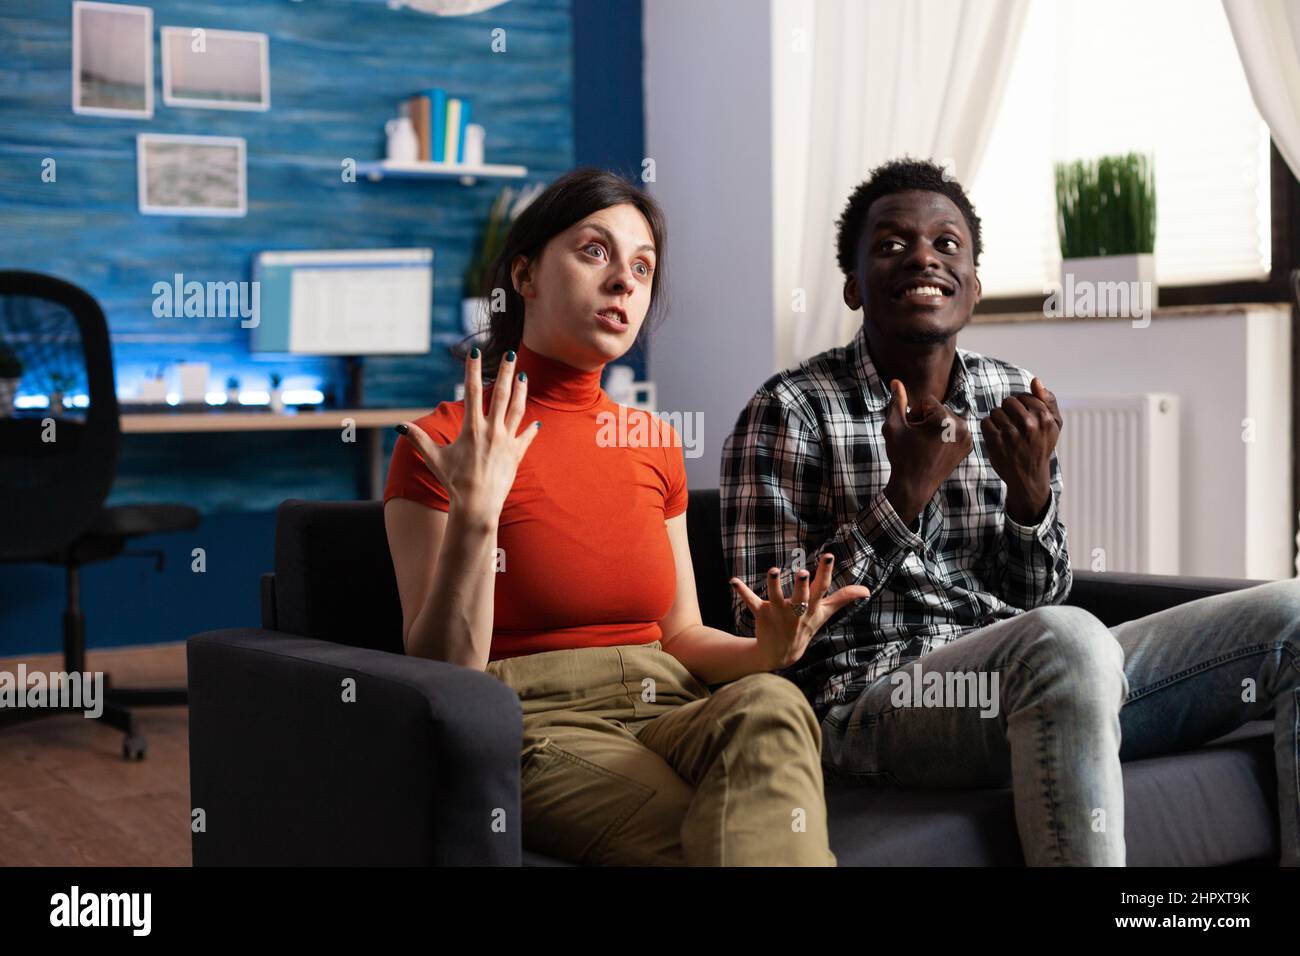 Angry multiracial persons reacting goofy over unhealthy conflict while gesturing agressively. Irritated adults fight over marriage problems while at home in living room on couch Stock Photo